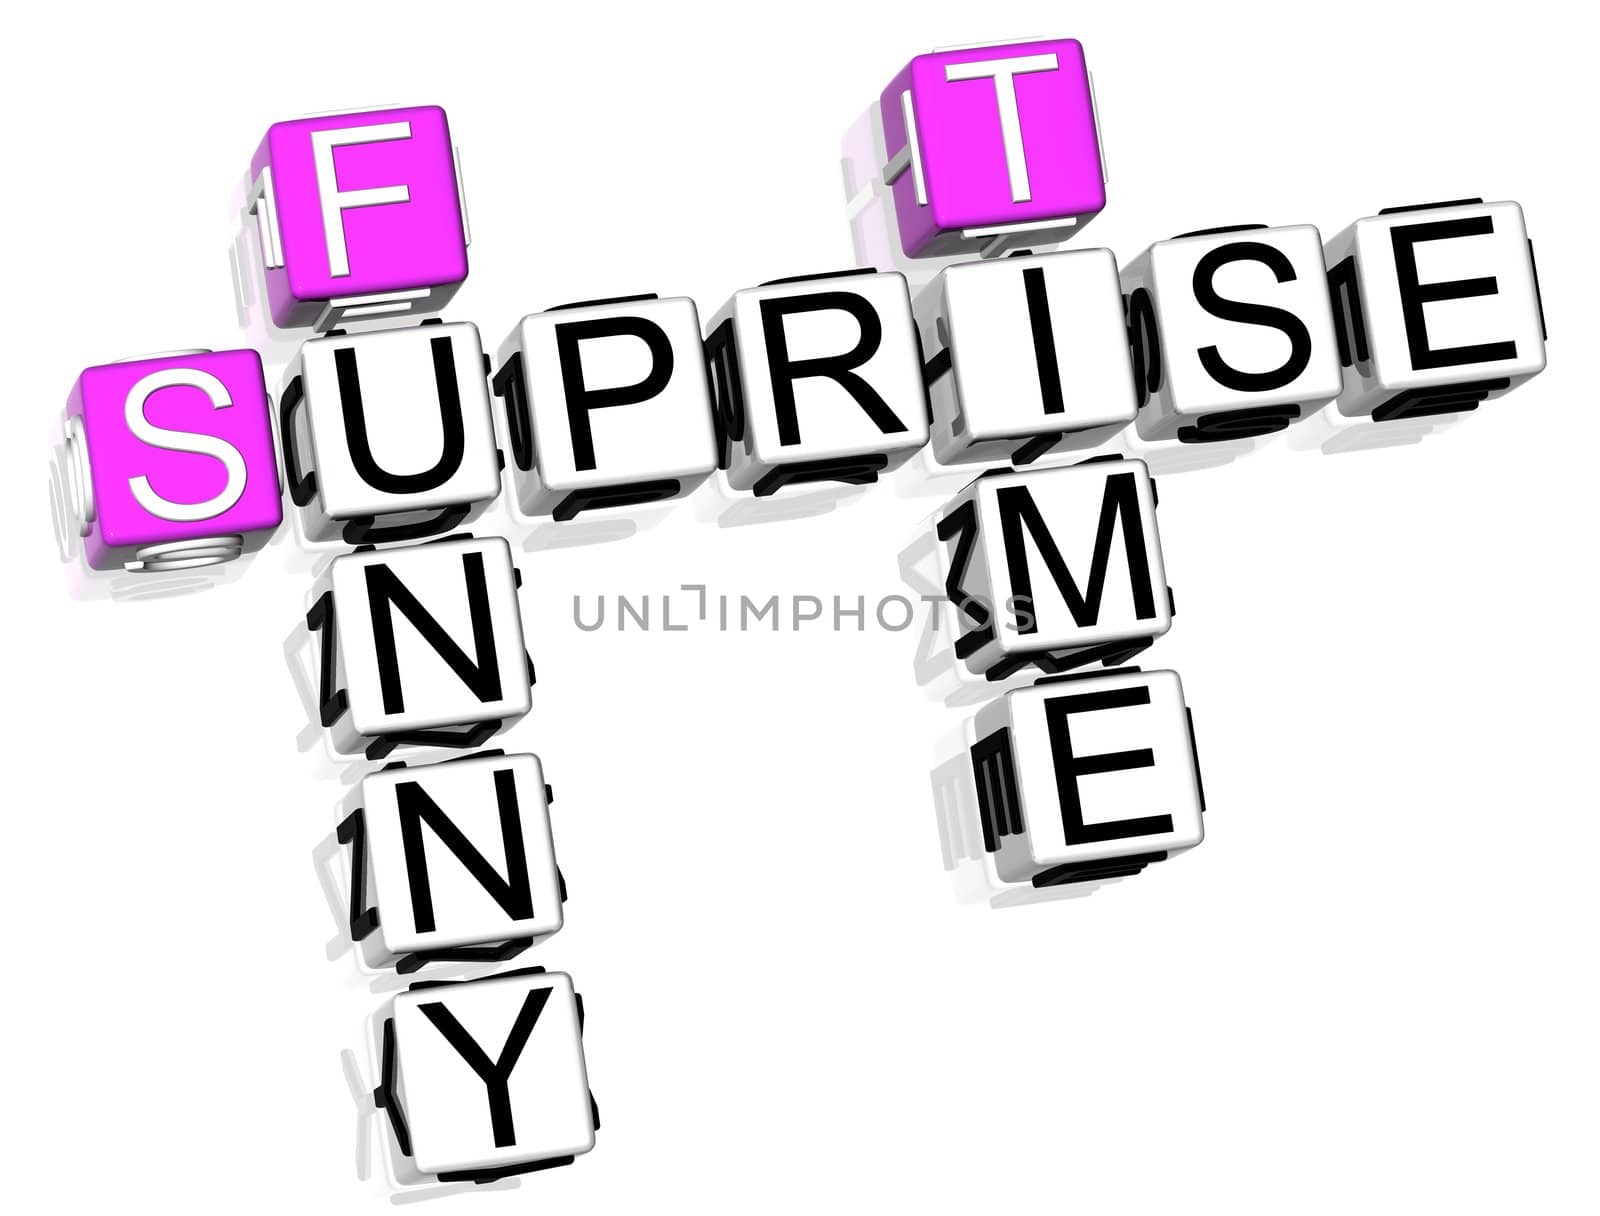 3D Suprise Crossword text on white background